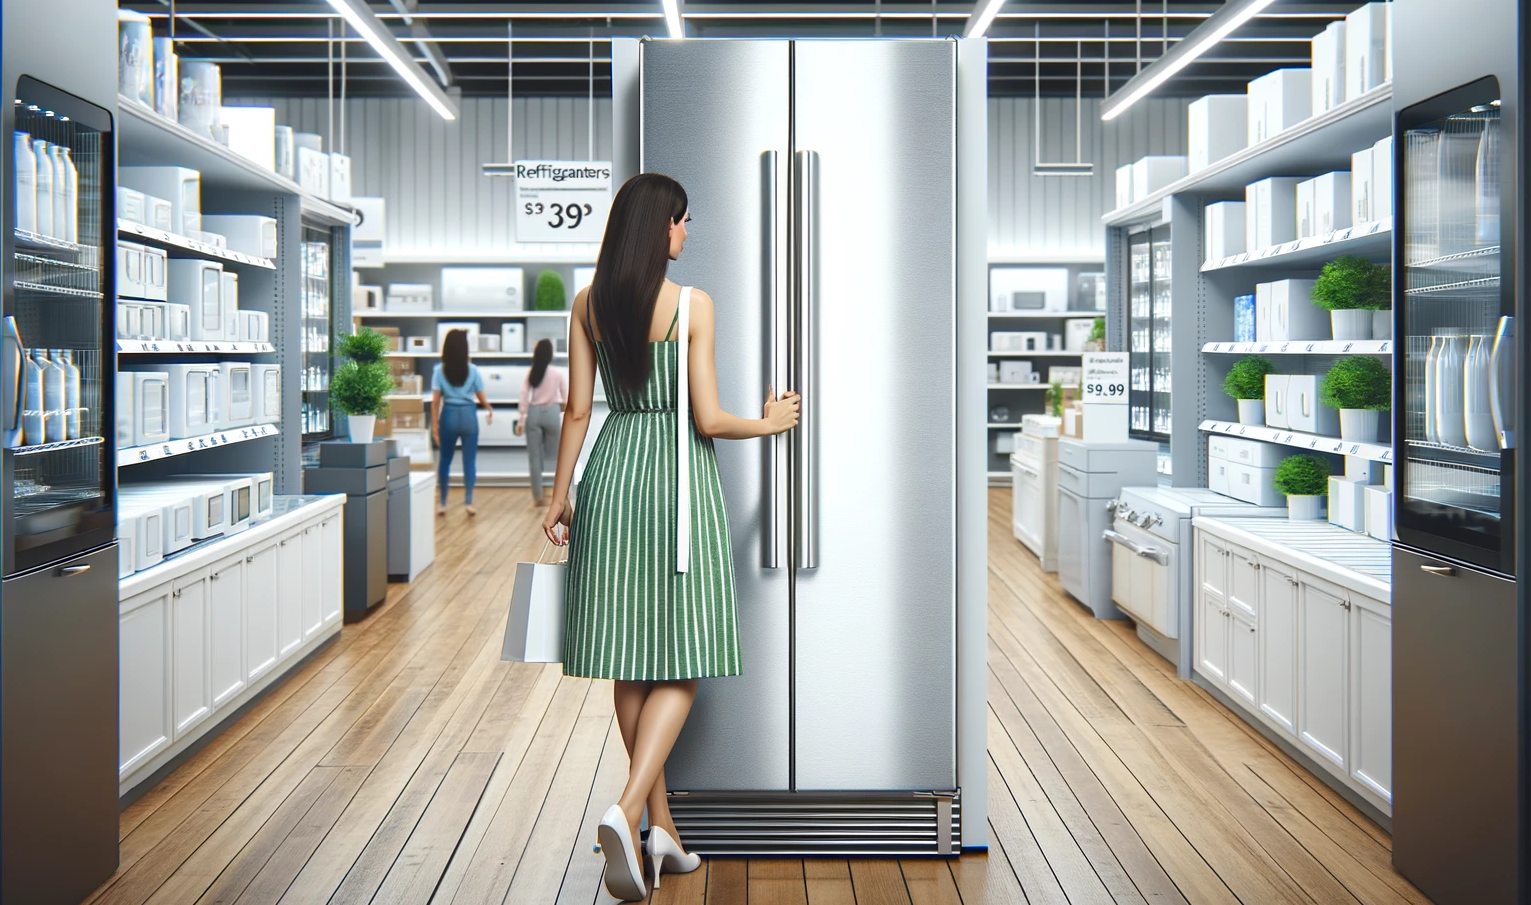 How To Choose A New Refrigerator